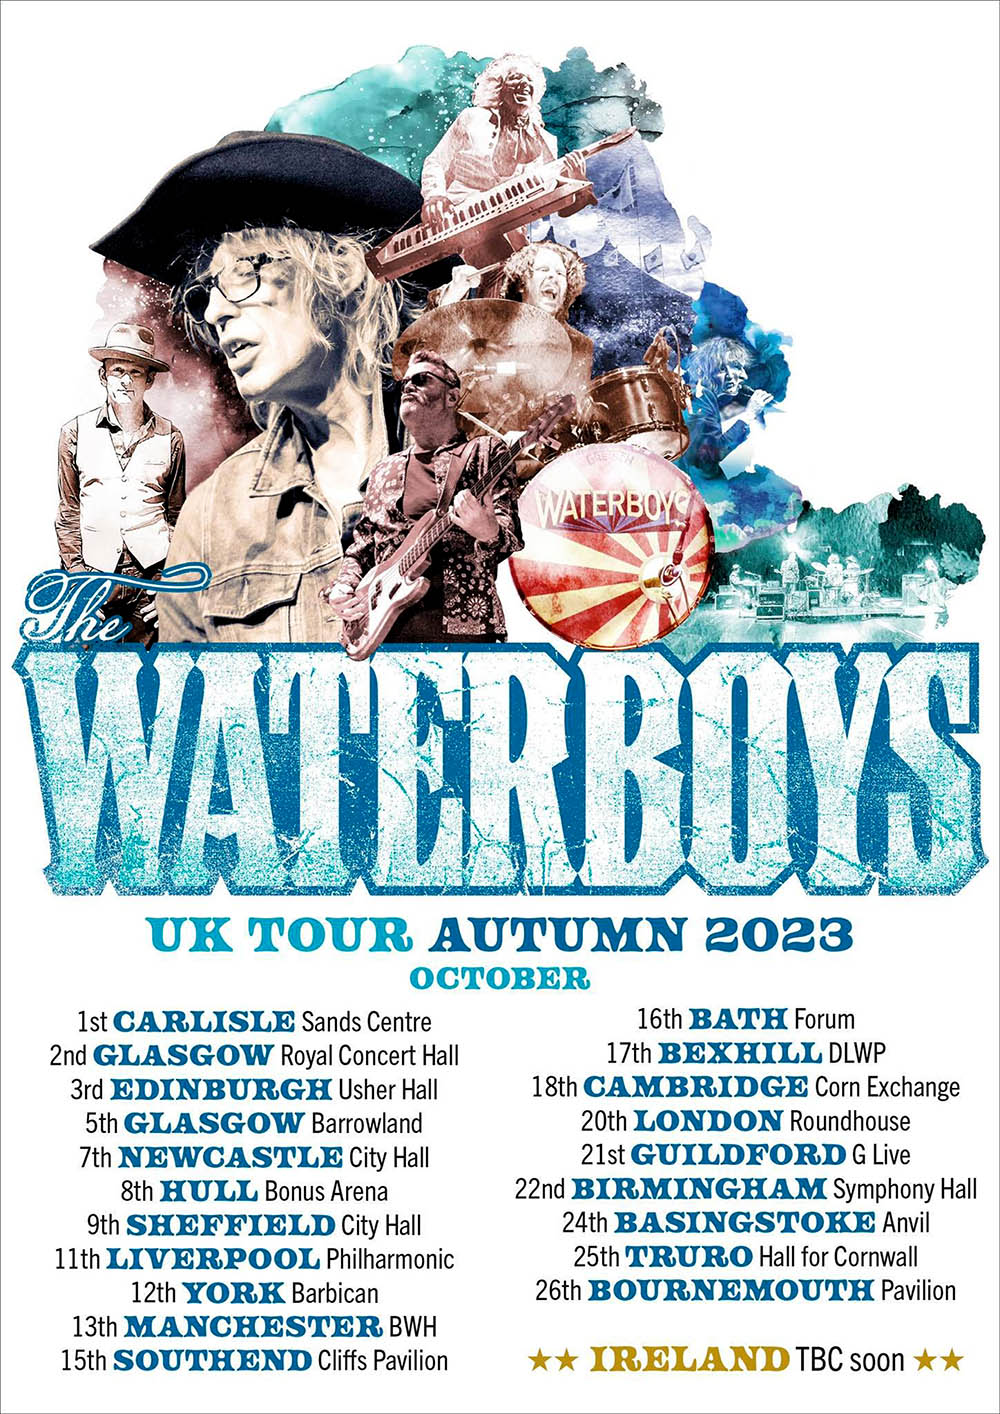 News The Waterboys, Tour Dates, Releases